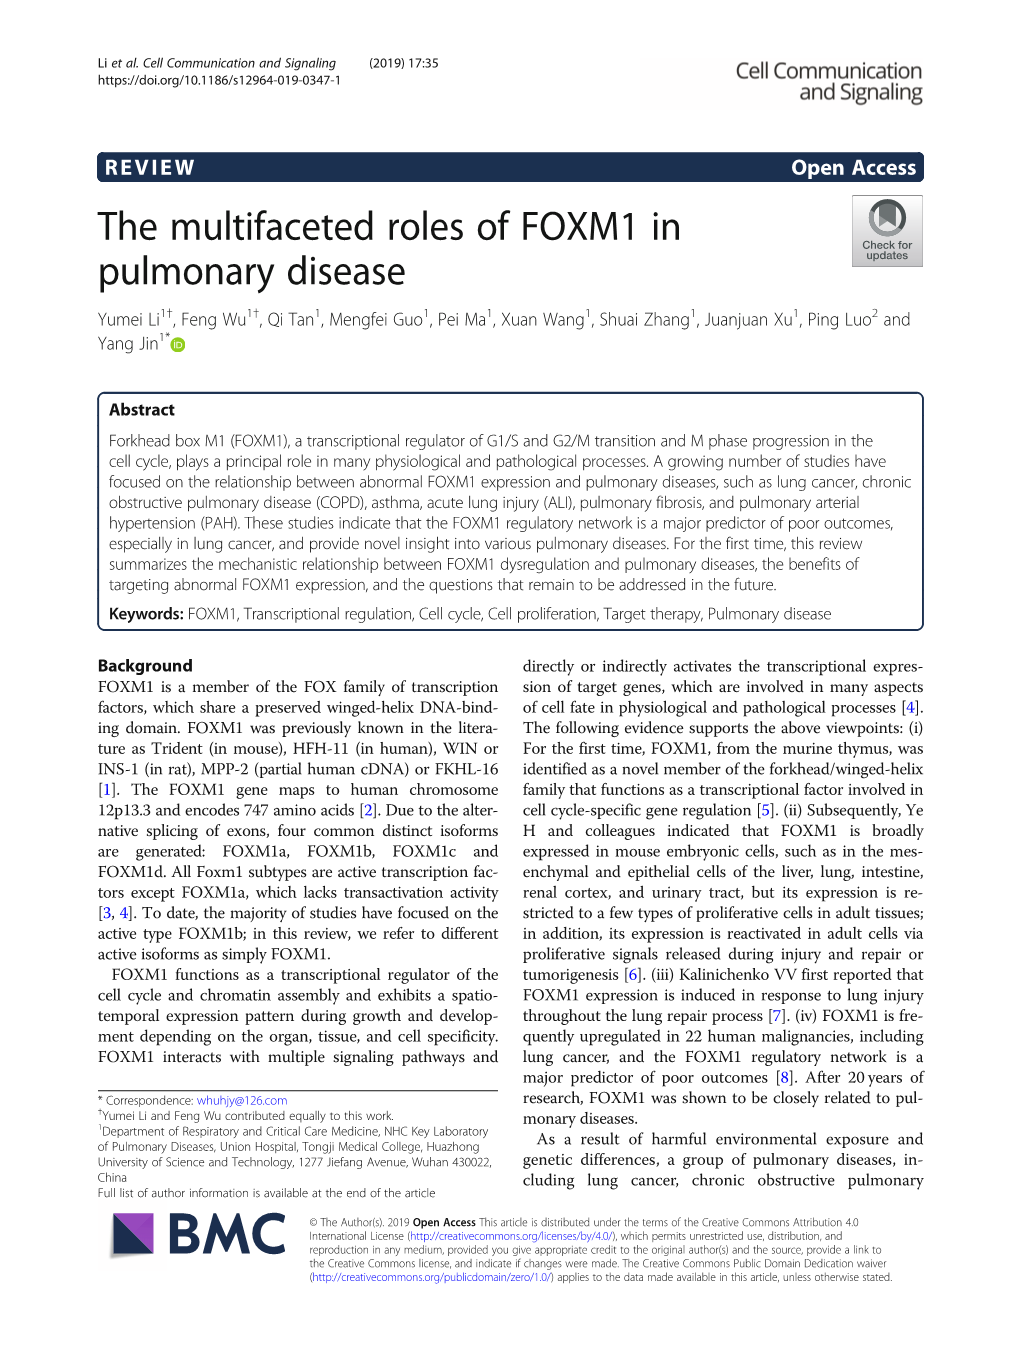 The Multifaceted Roles of FOXM1 in Pulmonary Disease